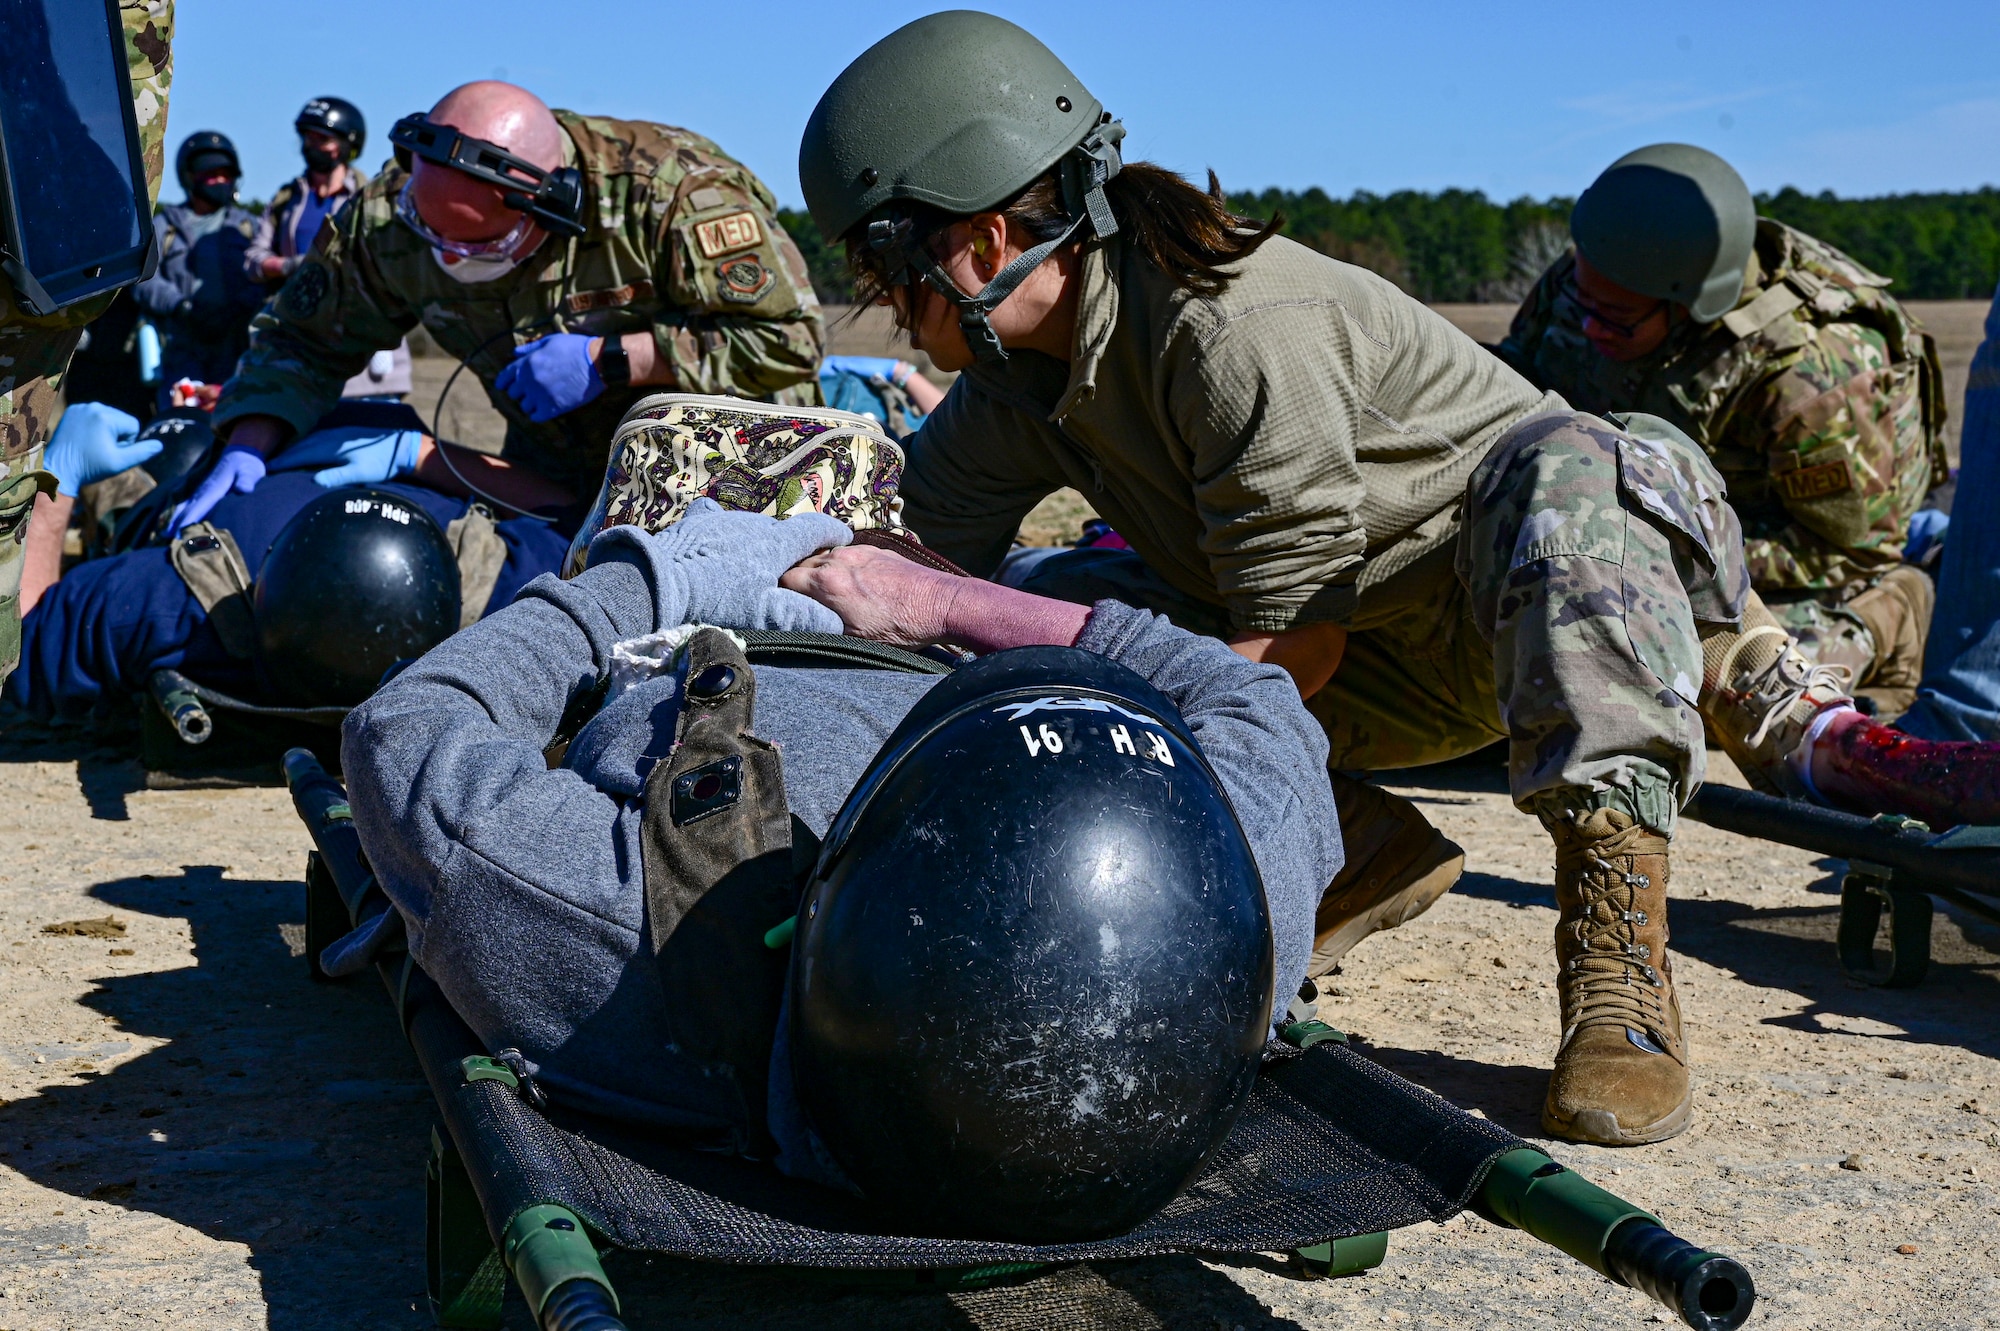 Aeromedical Evacuation technicians assist patients with simulated injuries during an Aeromedical Evacuation exercise